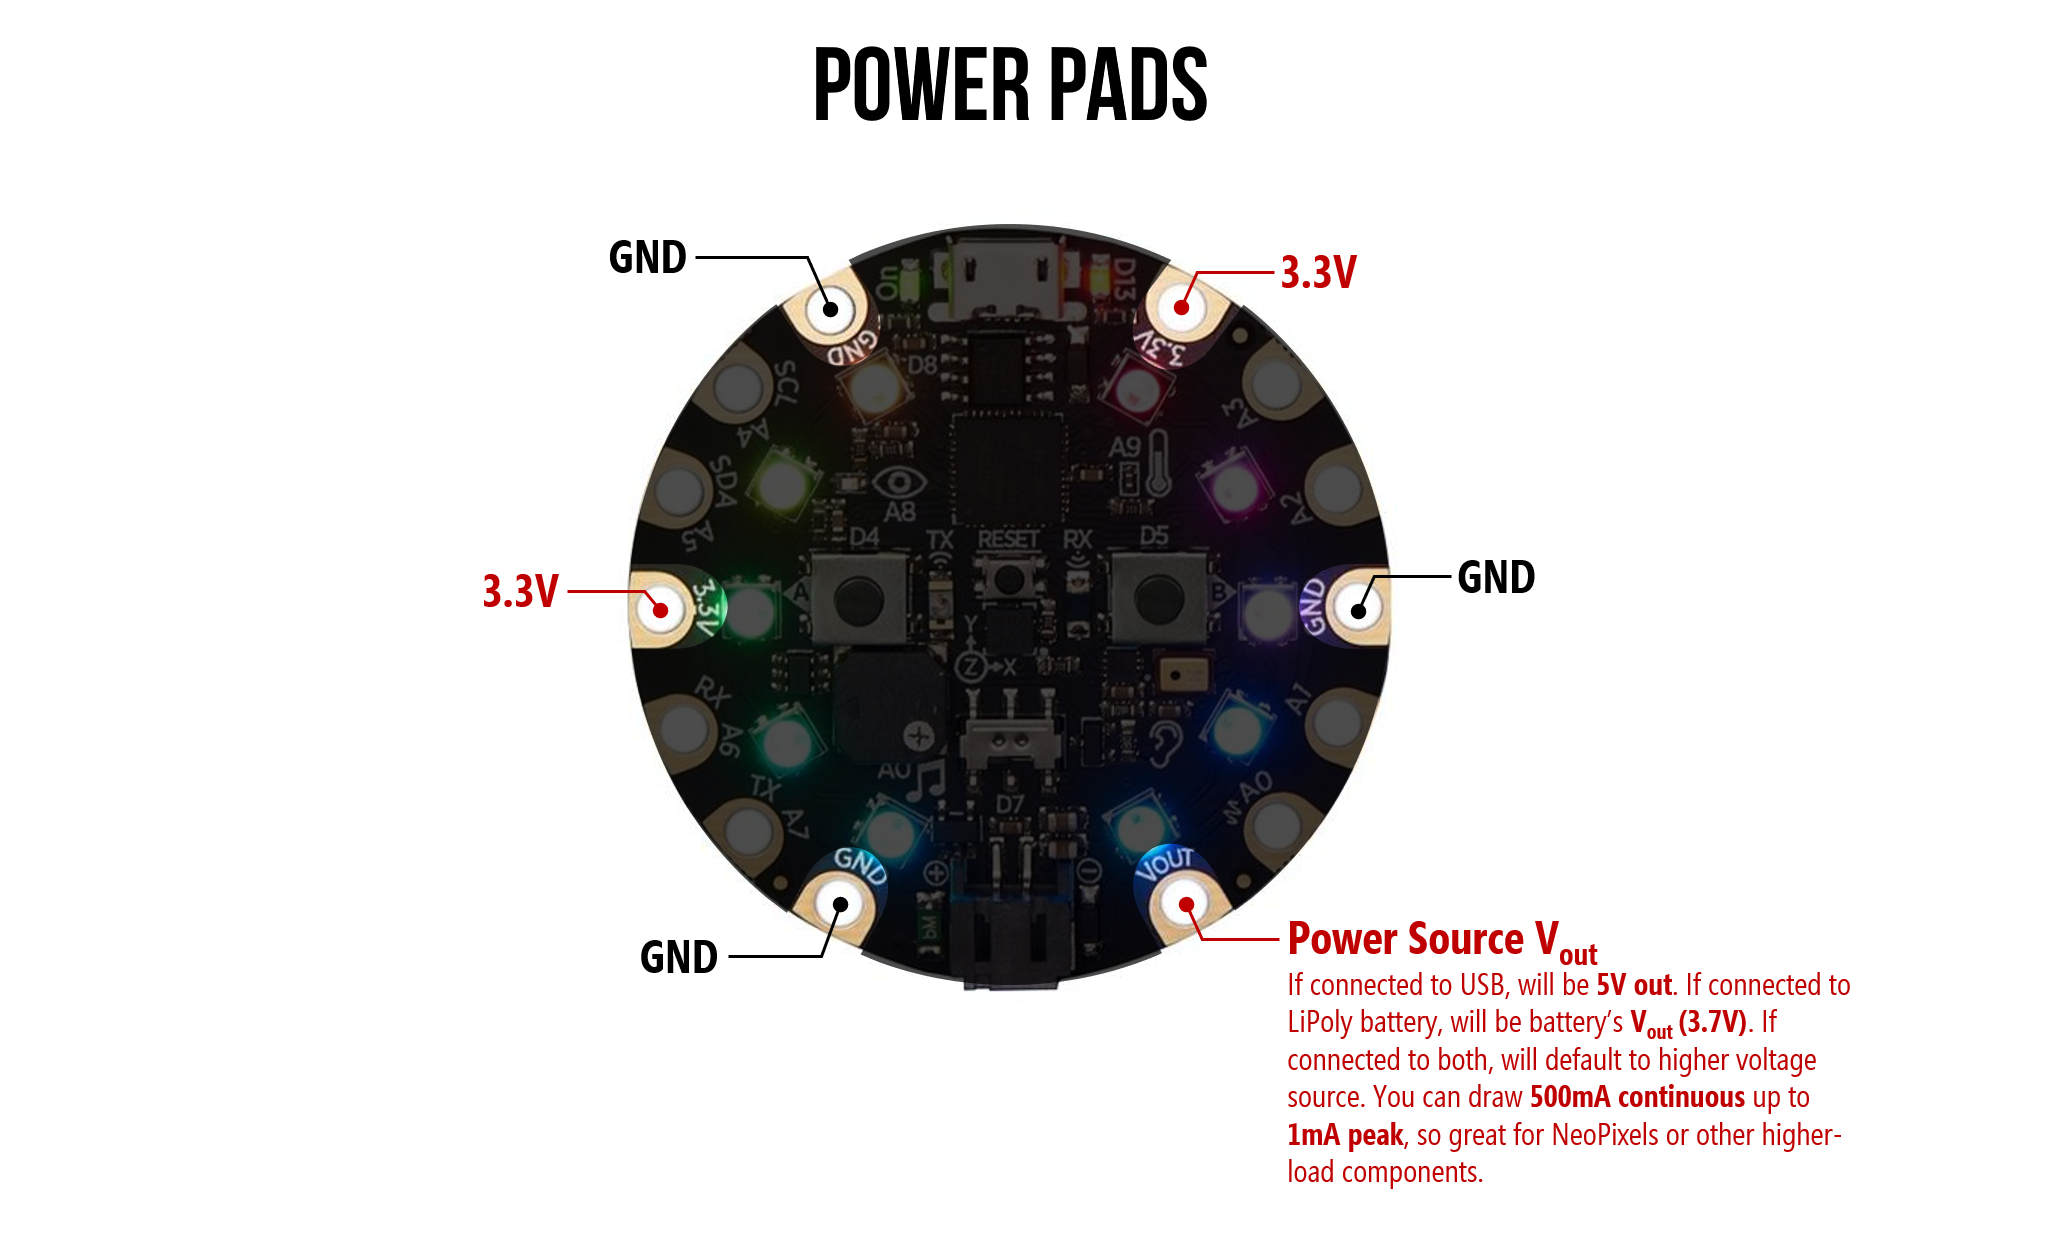 A pinout diagram of the CPX highlighting the alligator power pads